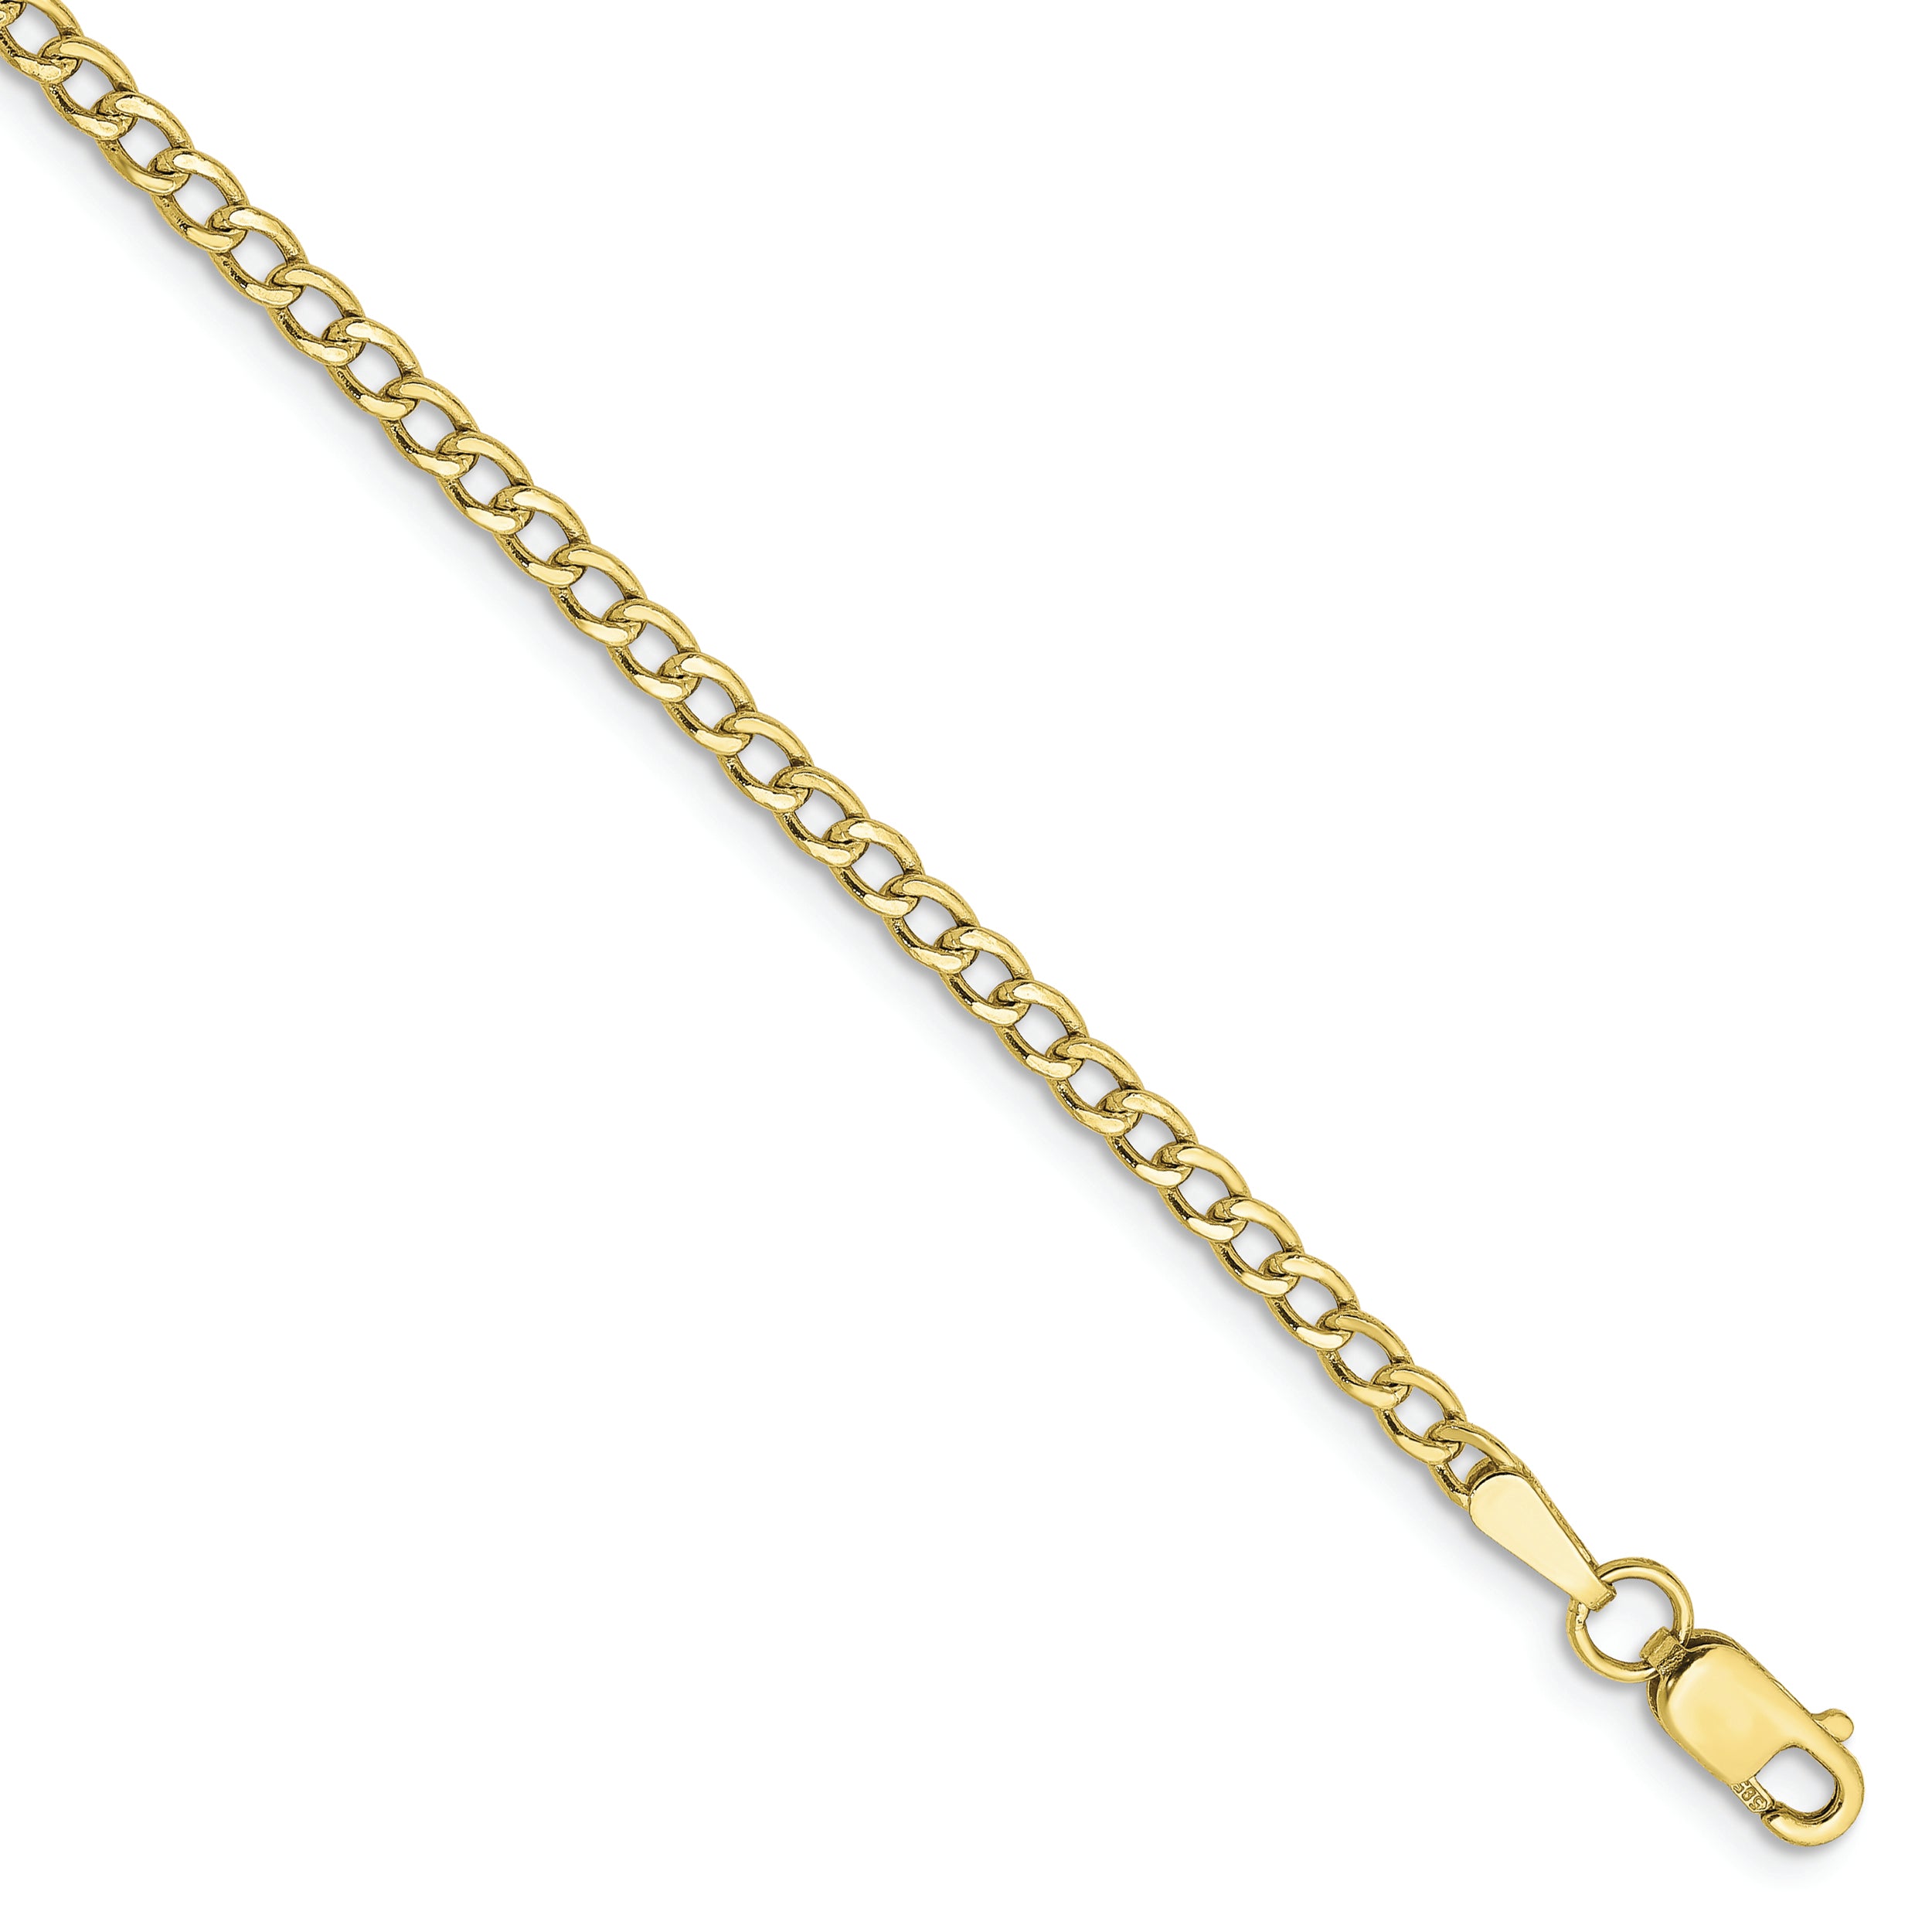 10k 2.5mm Semi-Solid Curb Link Chain Anklet